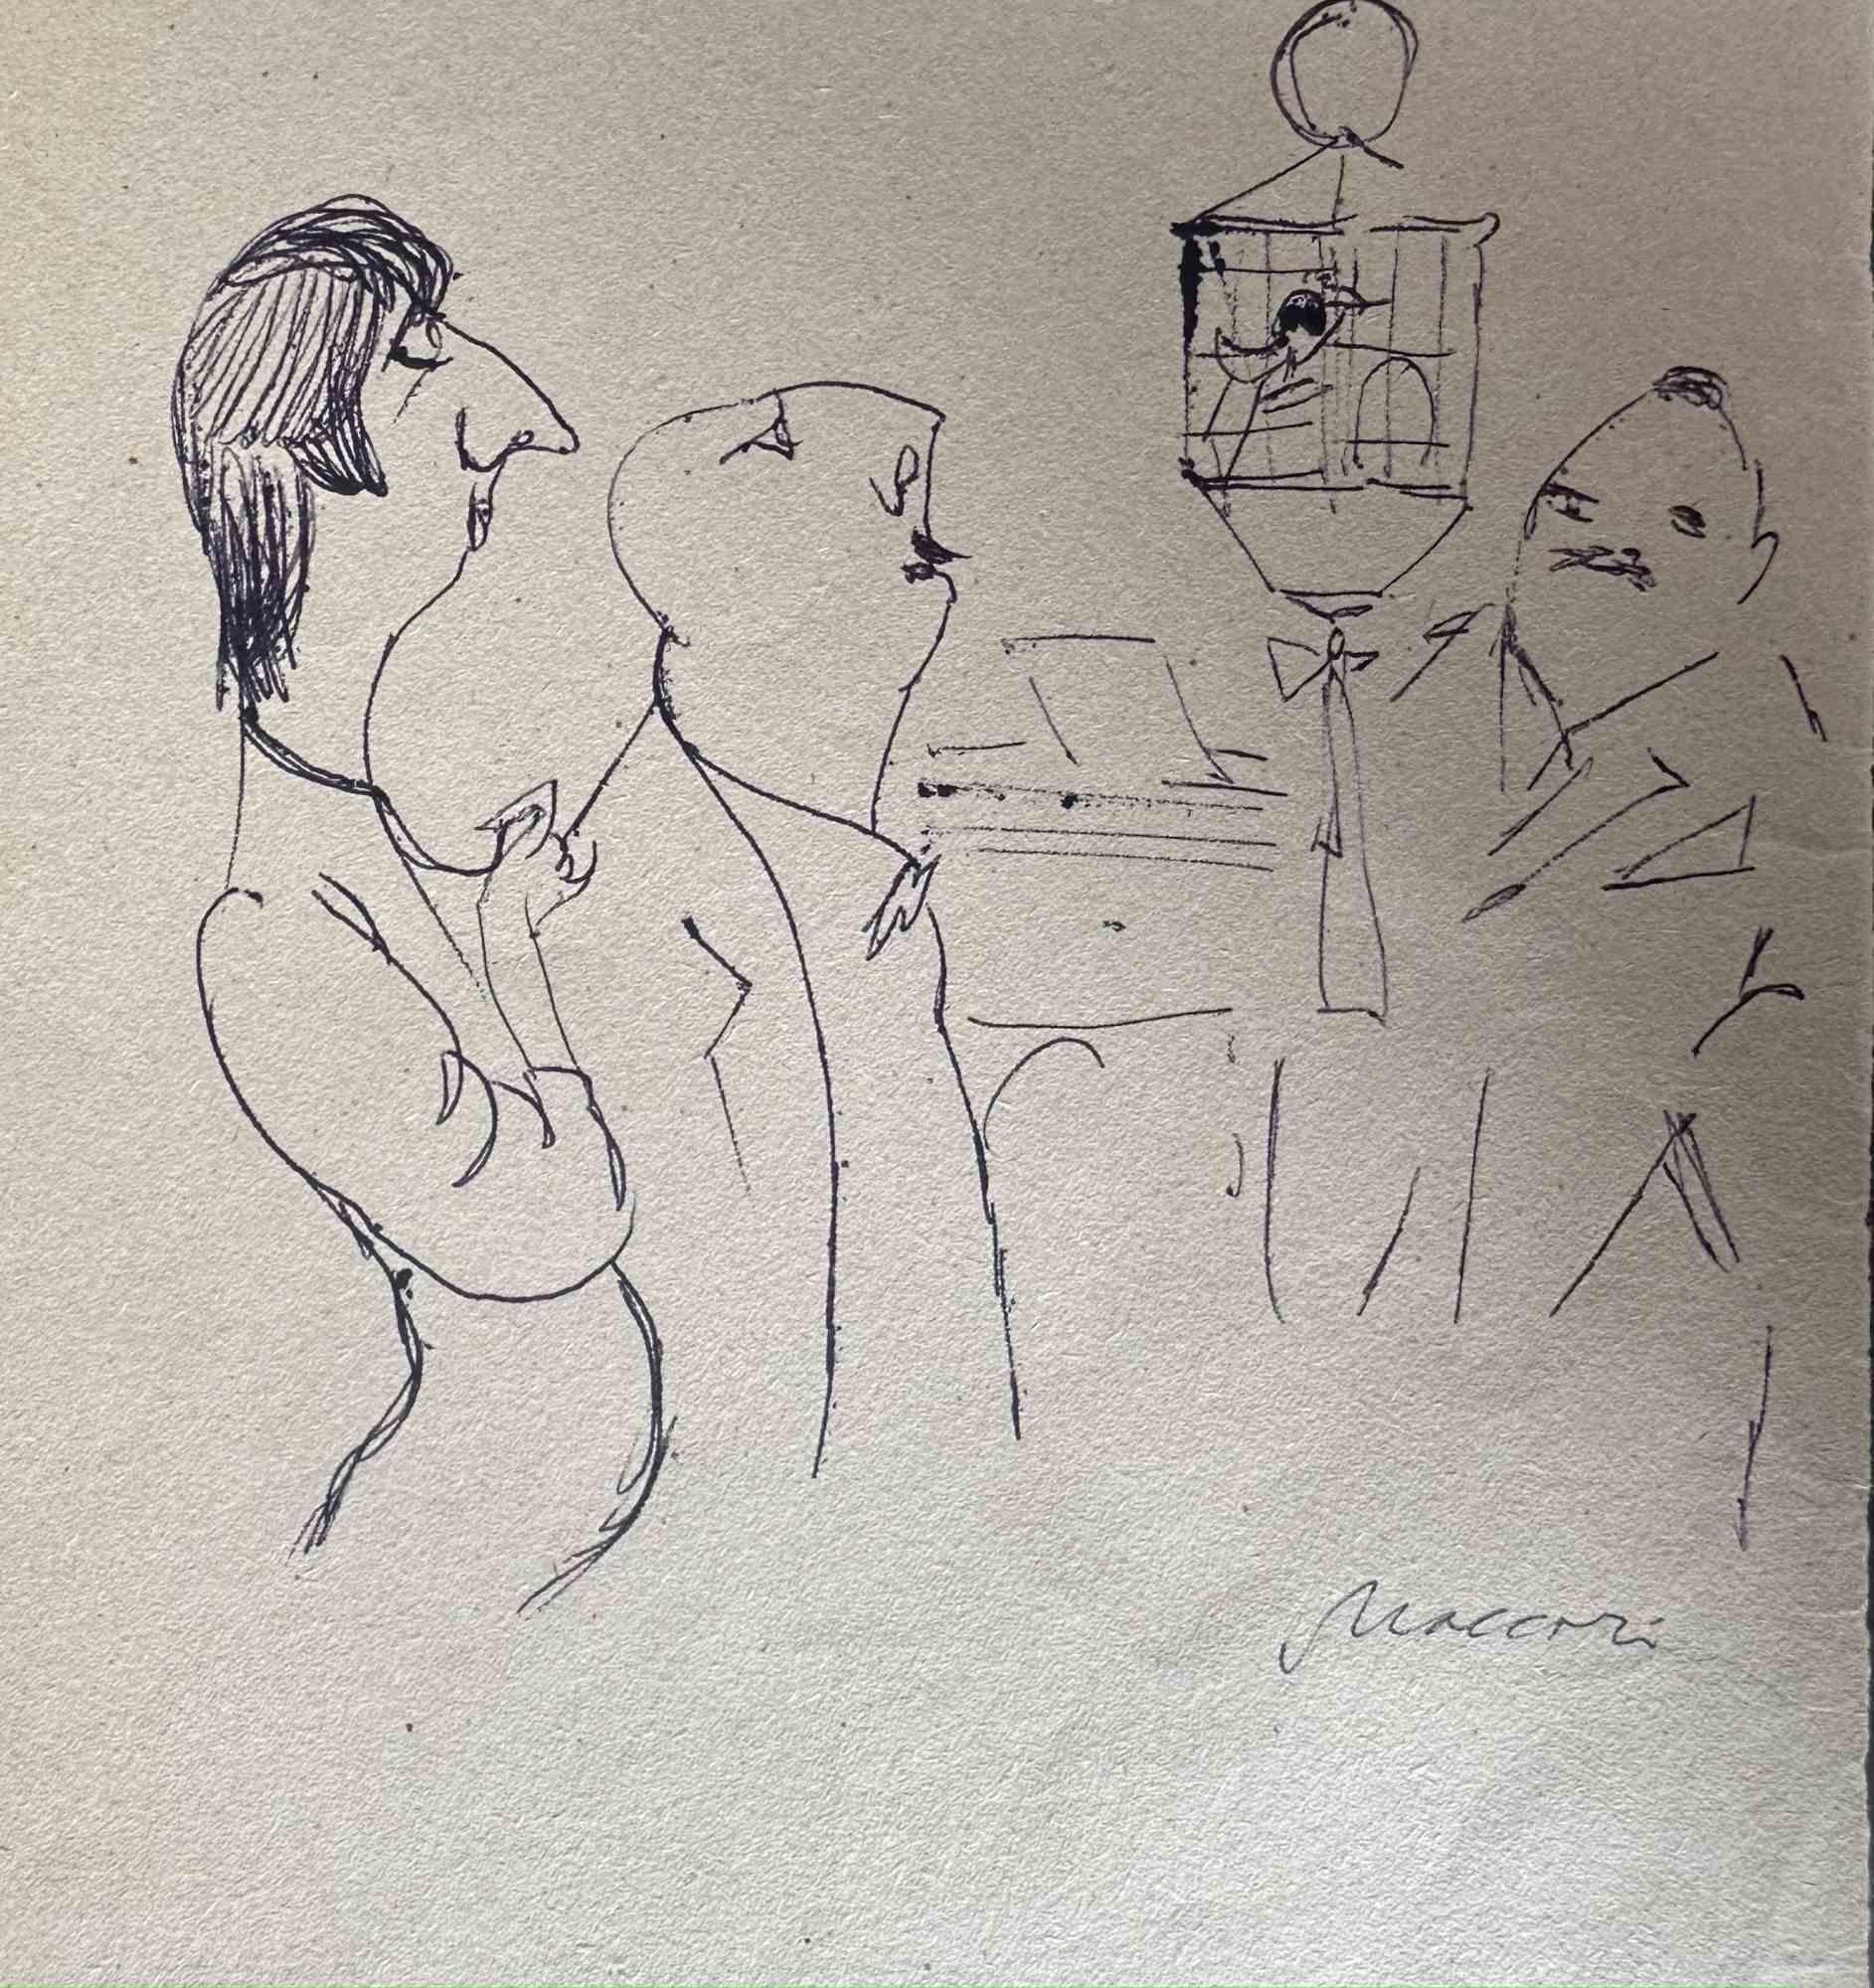 Caged Bird is a pen Drawing realized by Mino Maccari  (1924-1989) in the 1960s.

Hand-signed on the lower.

Good conditions.

Mino Maccari (Siena, 1924-Rome, June 16, 1989) was an Italian writer, painter, engraver and journalist, winner of the